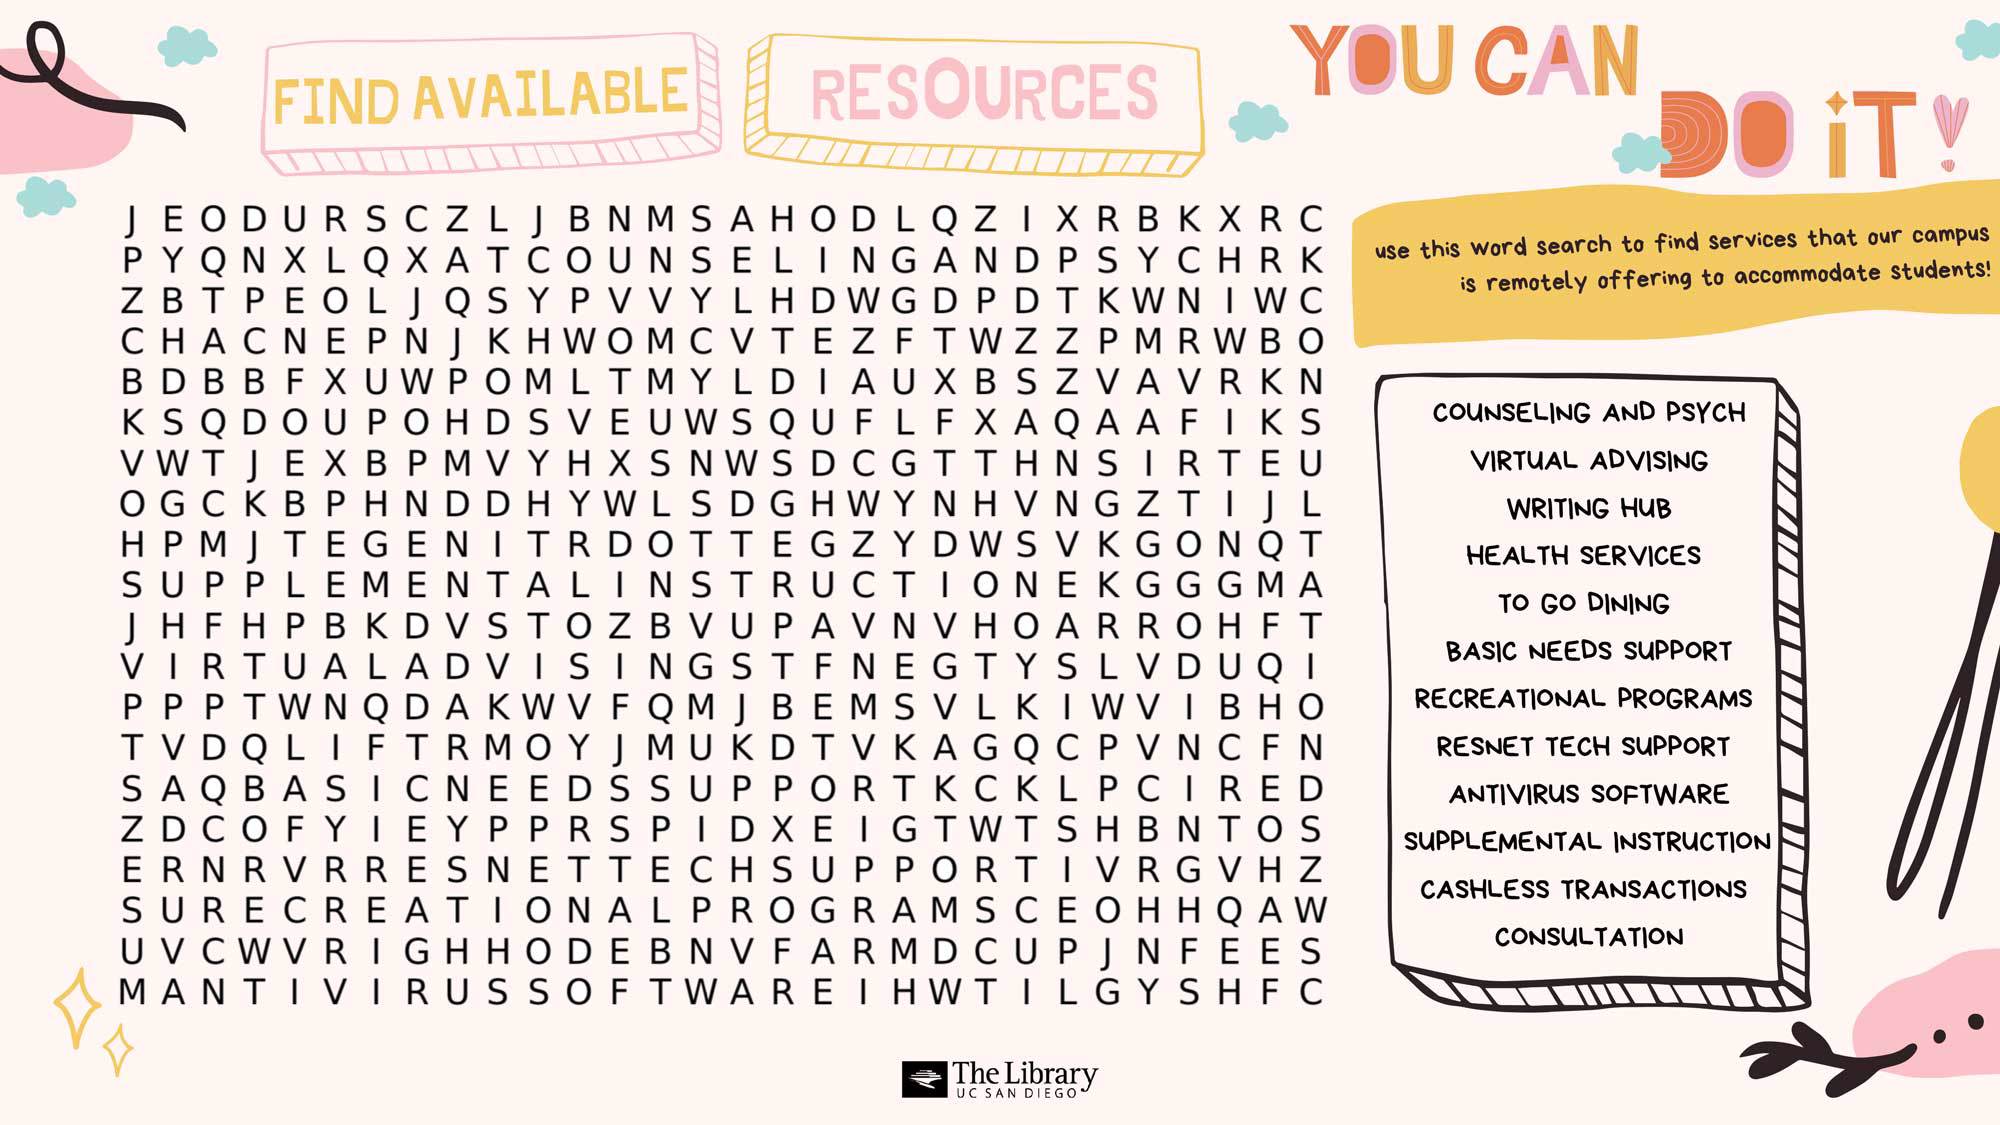 Link to download Available Resources word search.